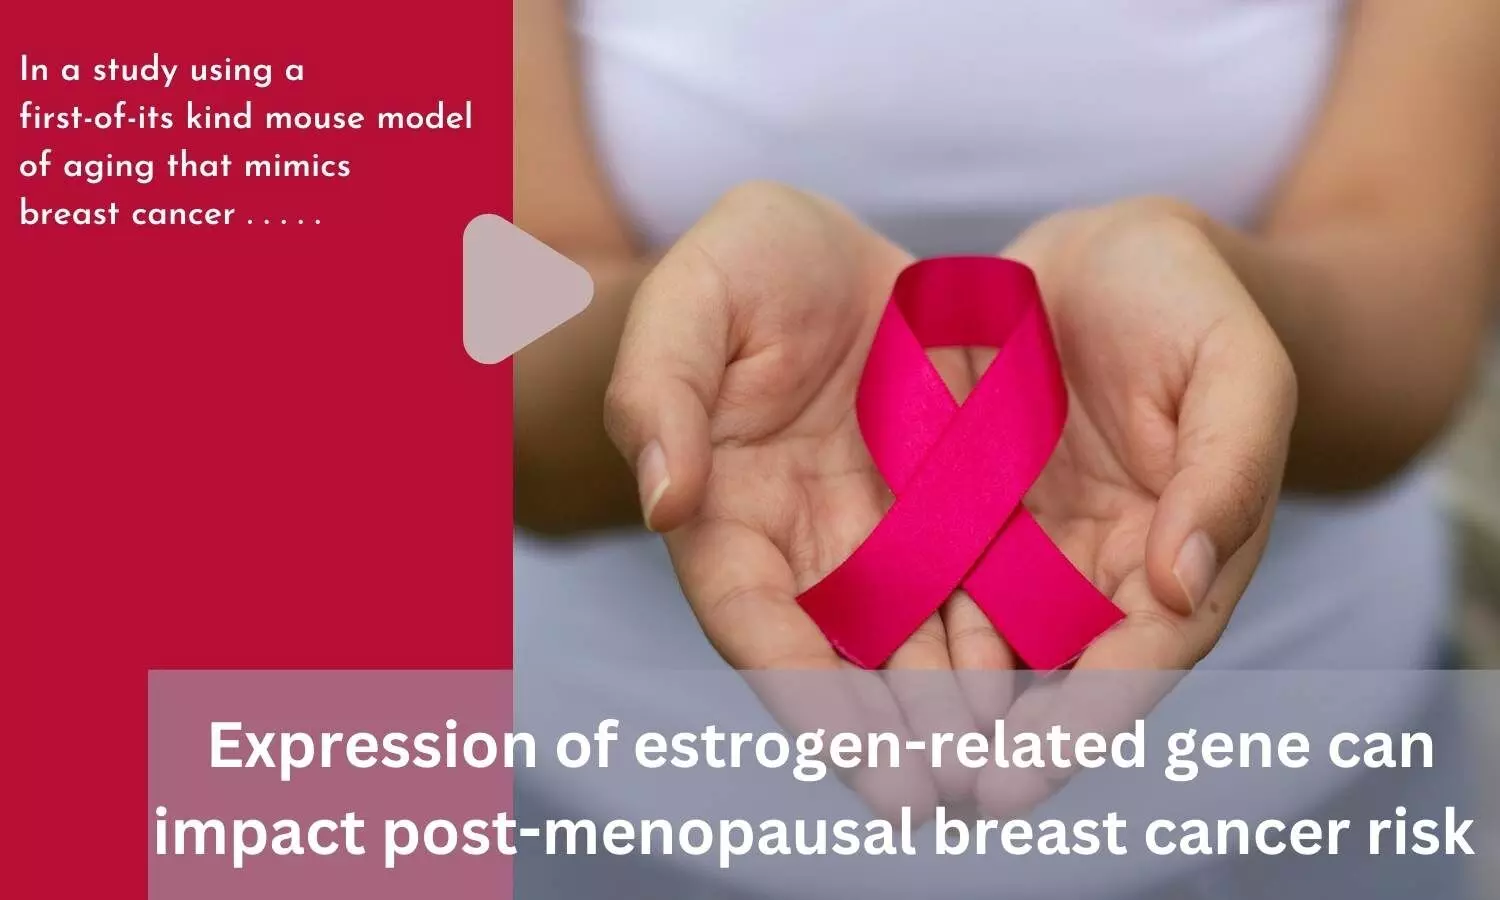 Expression of estrogen-related gene can impact post-menopausal breast cancer risk